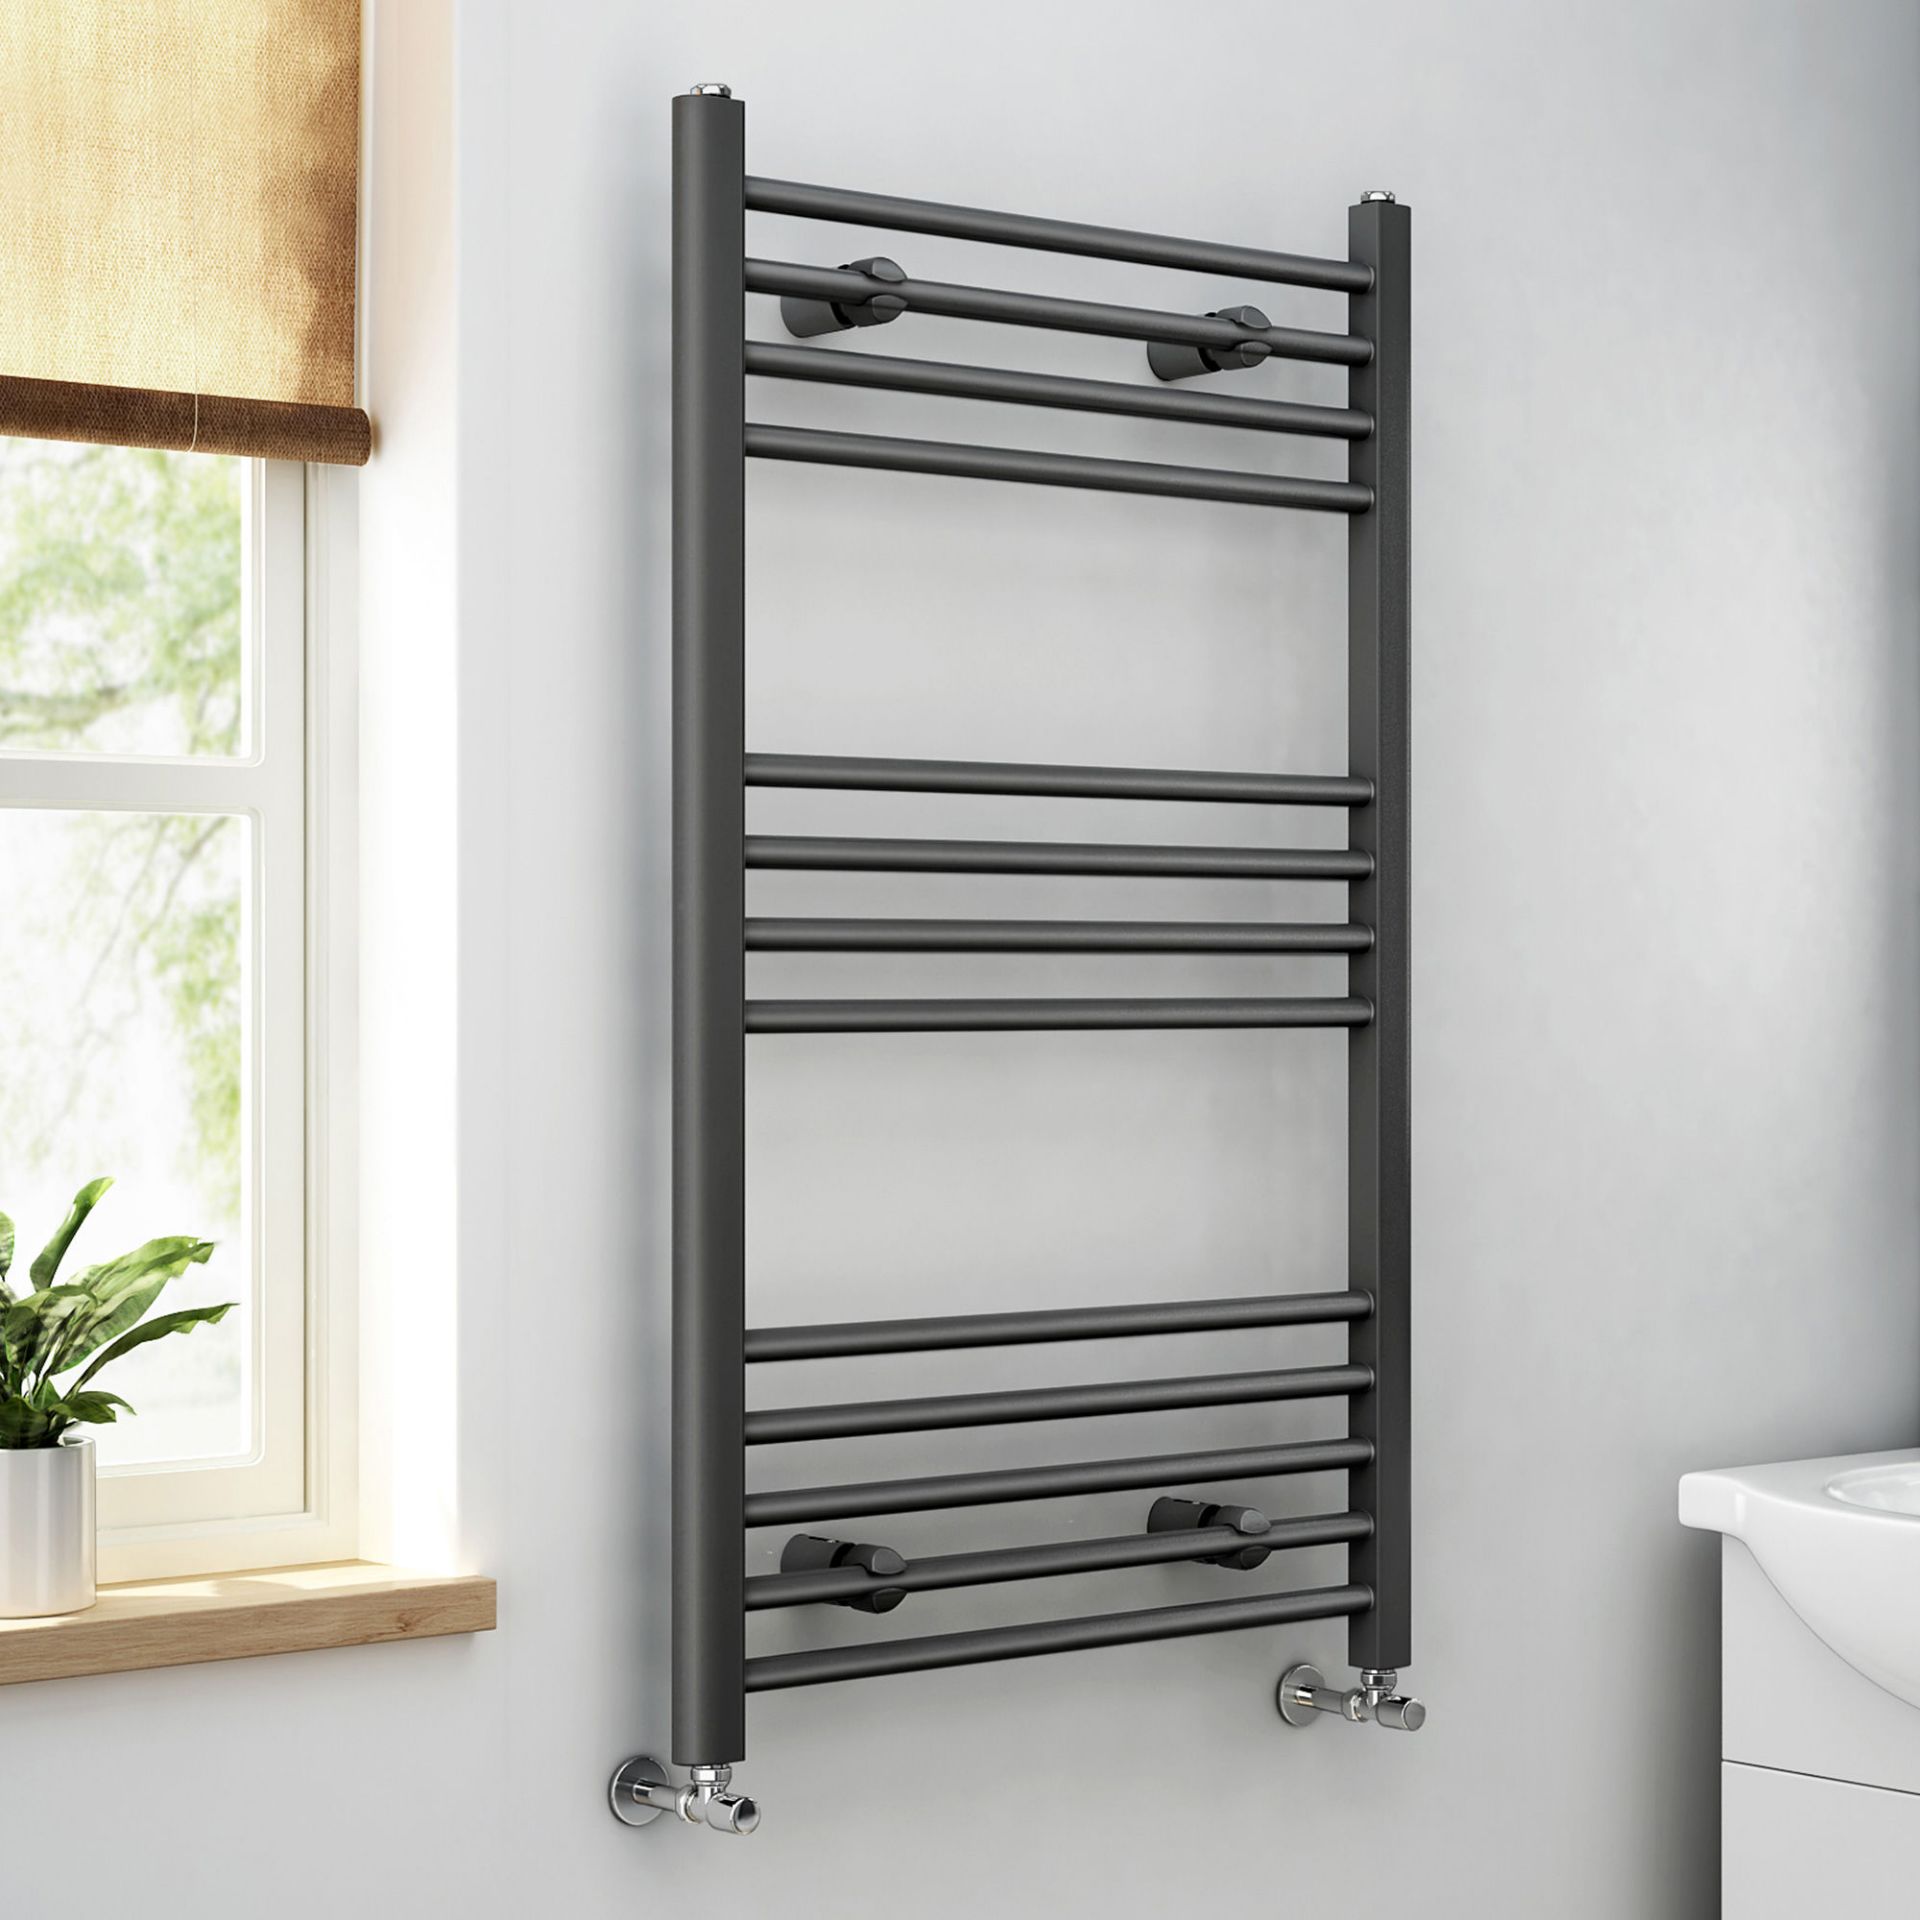 (DW251) 1000x600mm - 20mm Tubes - Anthracite Heated Straight Rail Ladder Towel Radiator. RRP £...